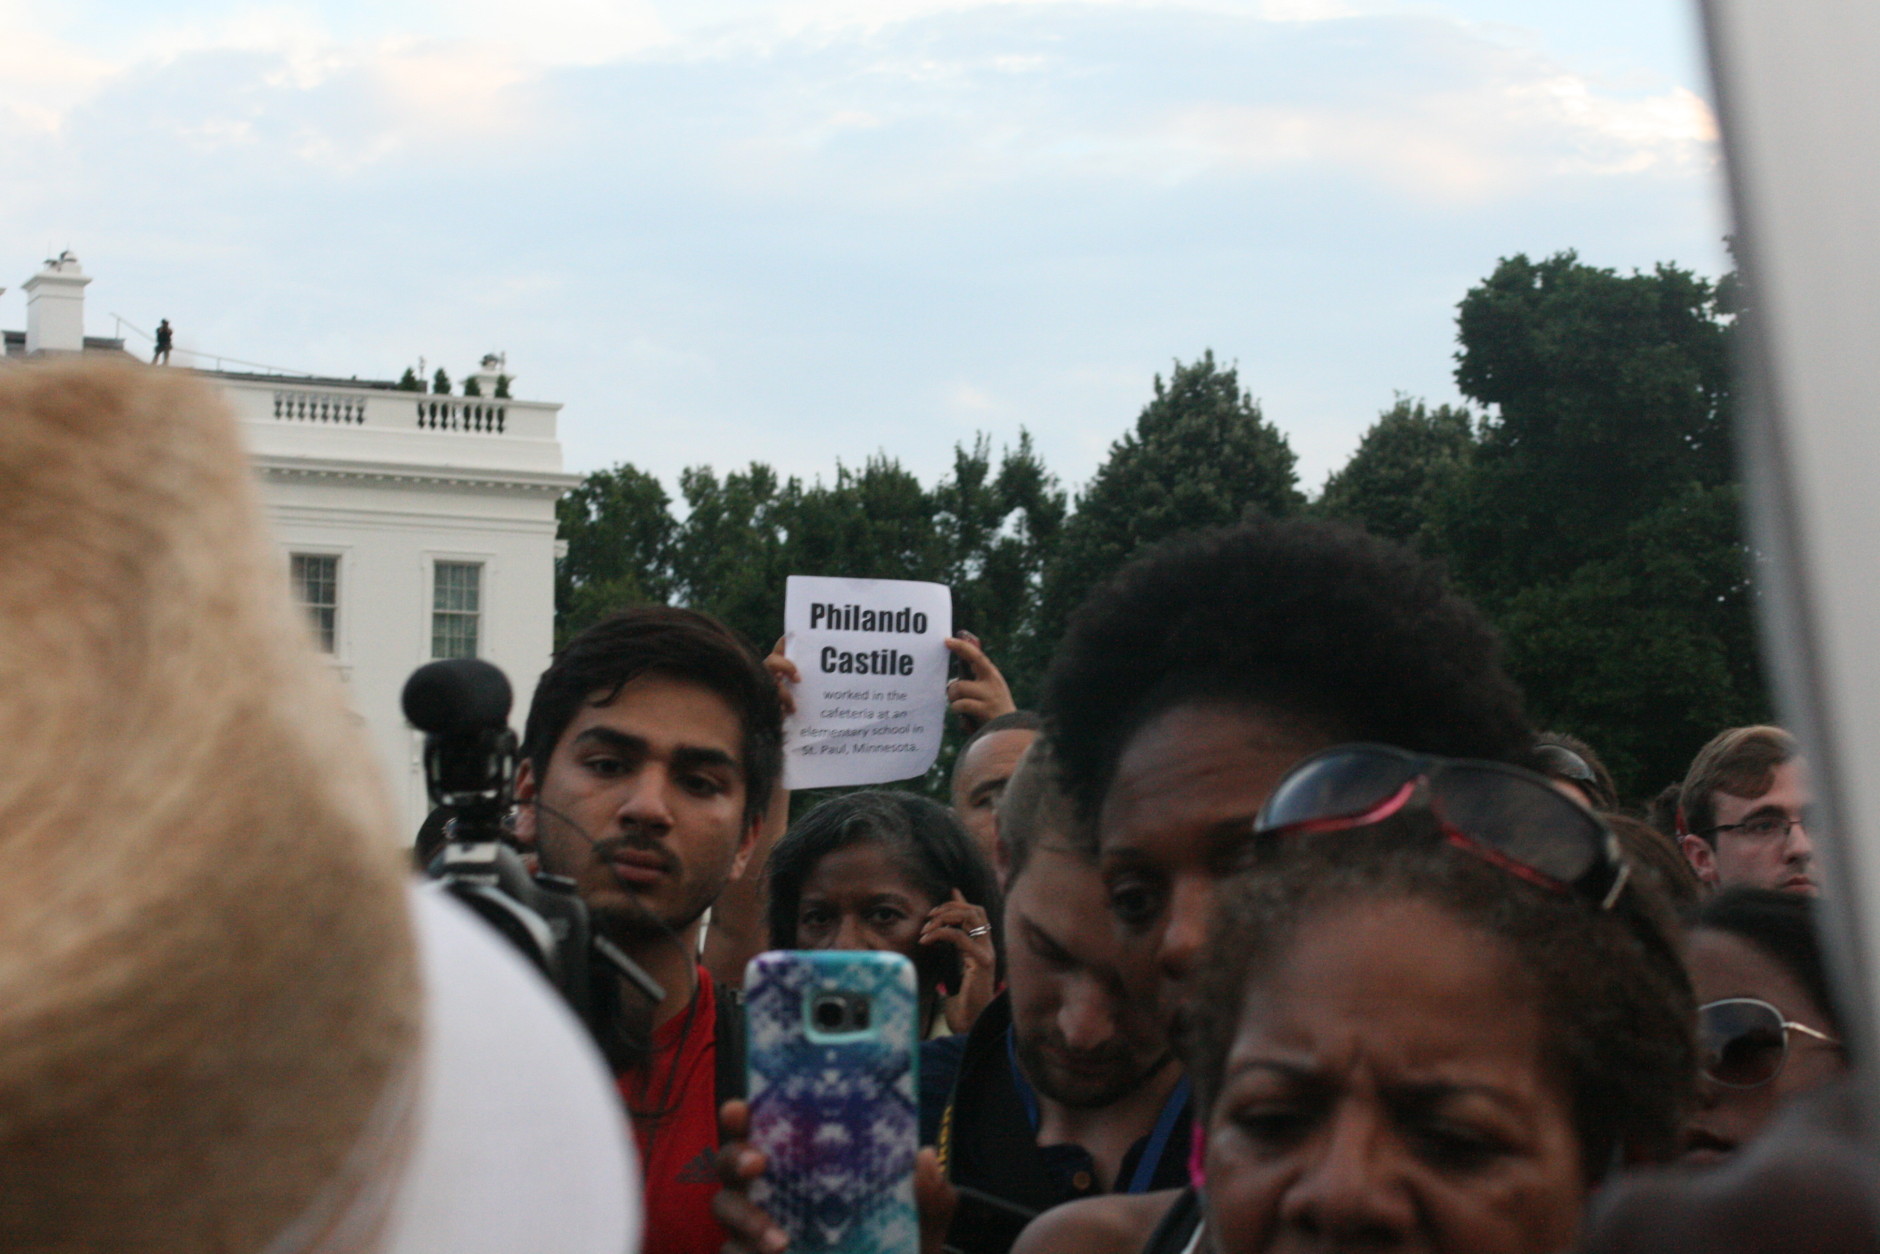 The crowd at the White House Thursday evening. (WTOP/Liz Anderson)